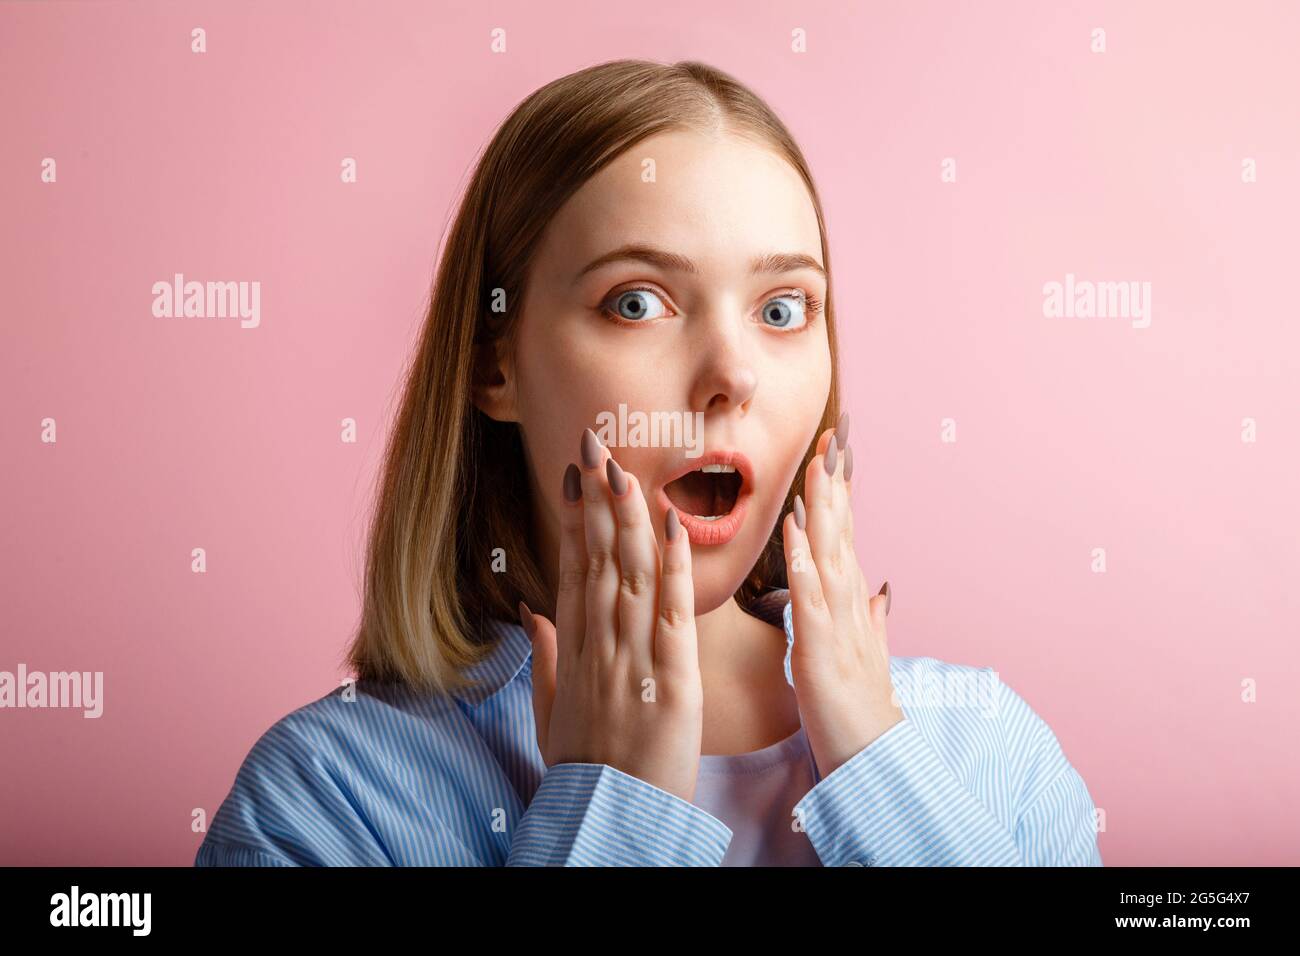 Emotional portrait of surprised business woman with open mouth. Close up portrait of teenage girl student in shirt over isolated color pink background Stock Photo